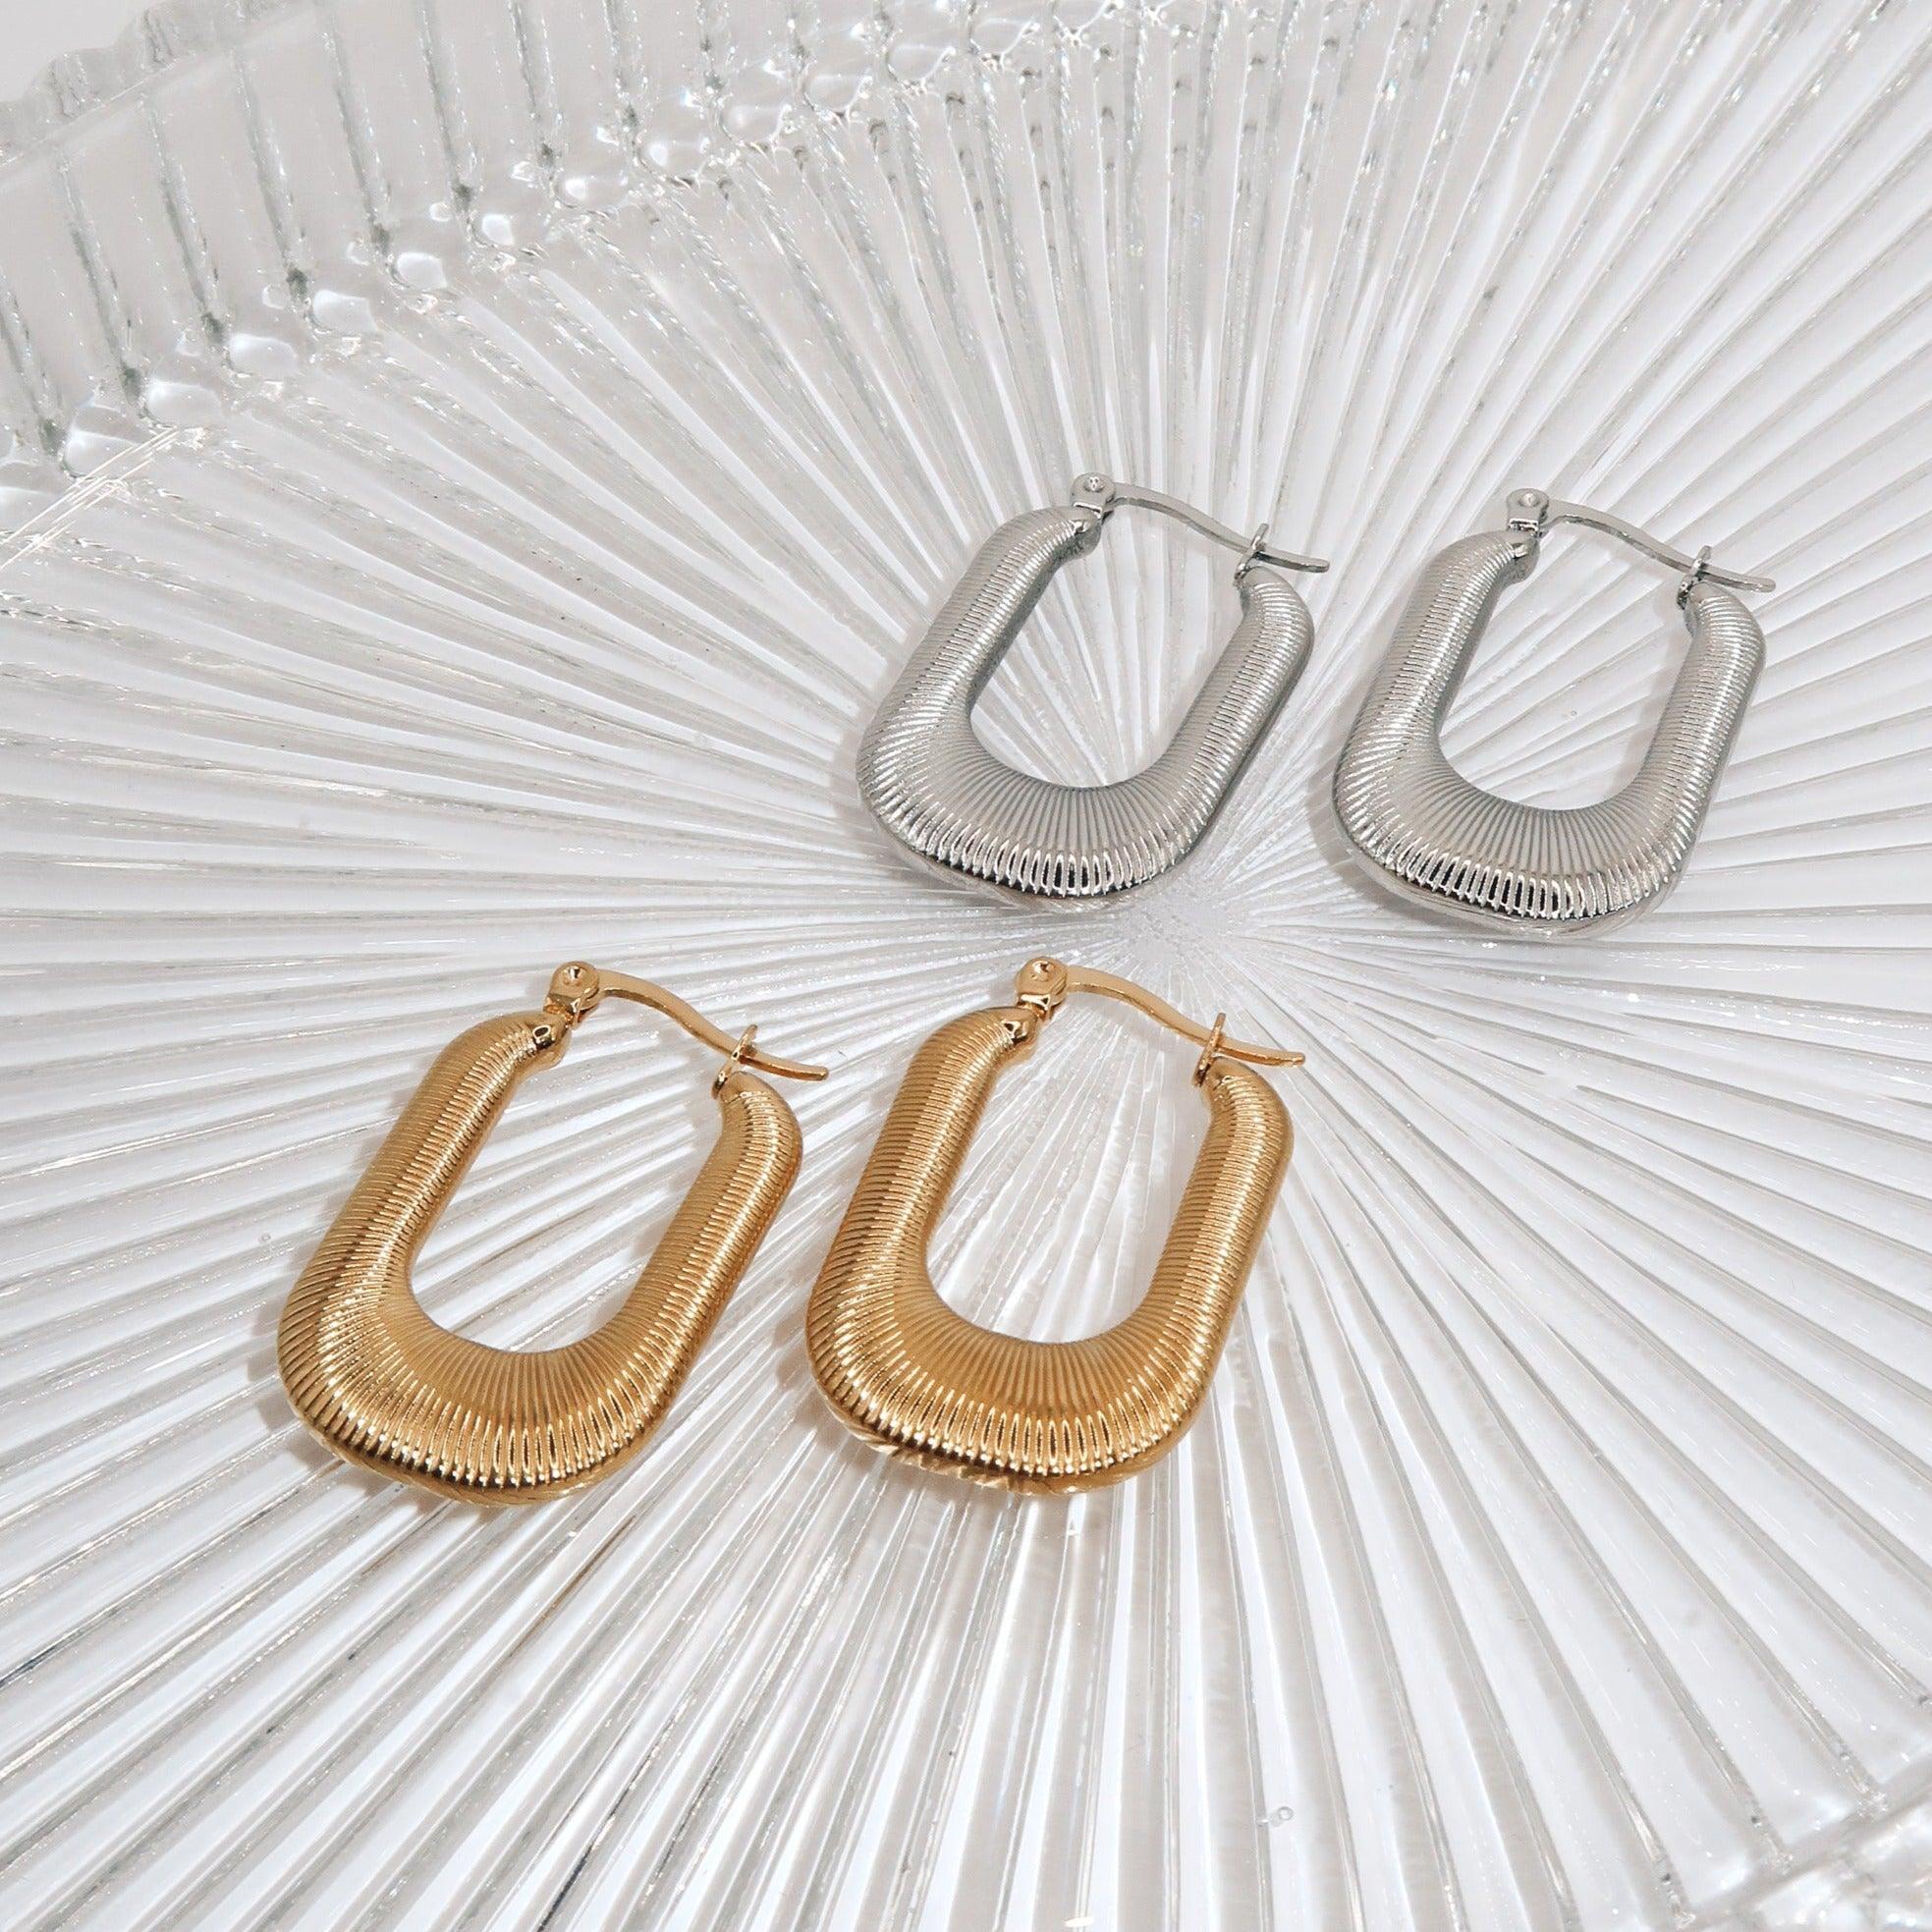 MARTA - 18K PVD Gold Plated Ribbed U-Shaped Earrings - Mixed Metals